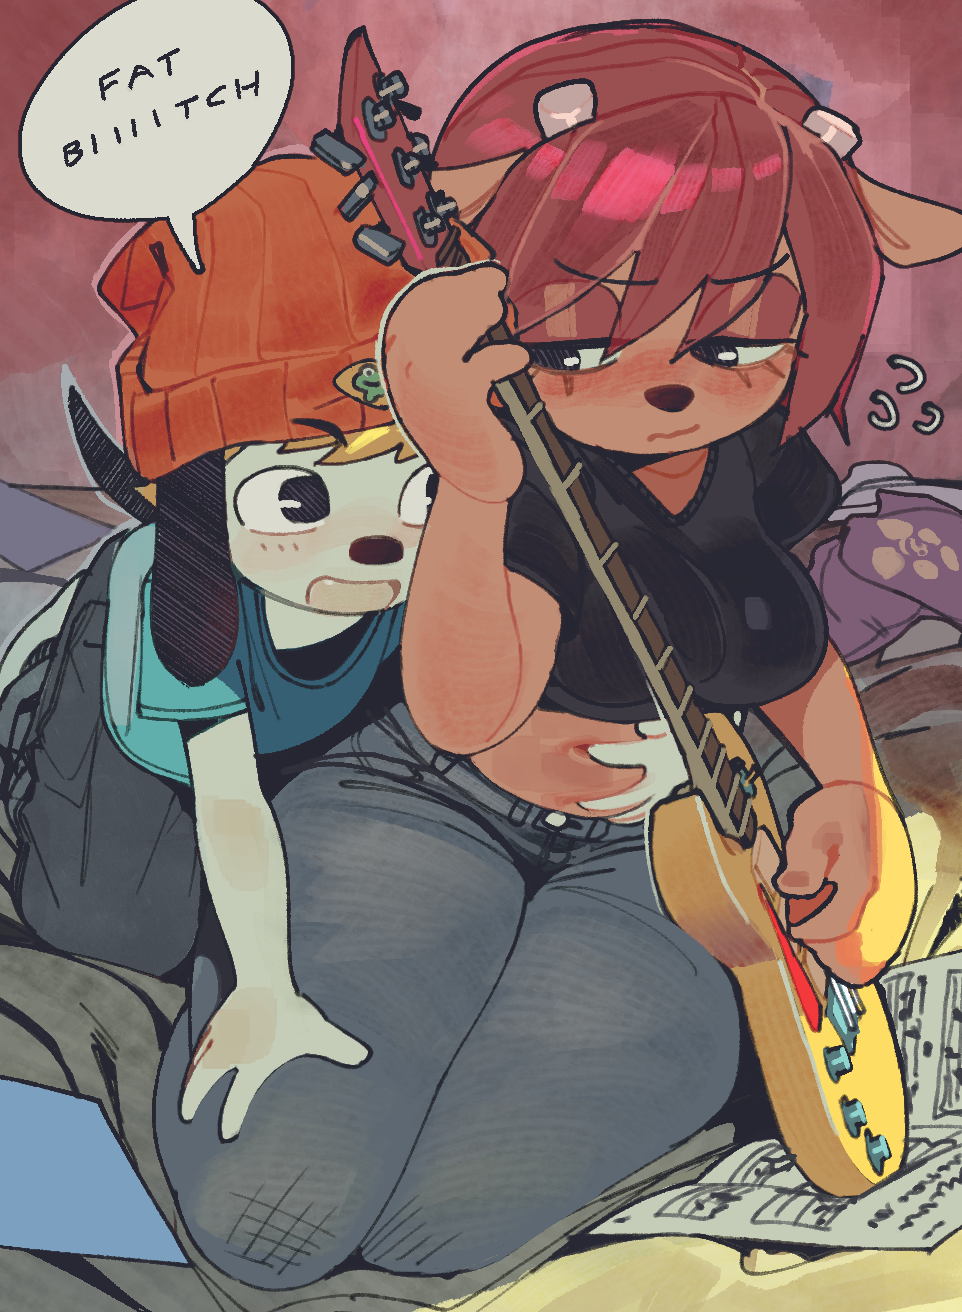 ArtStation - Jammin with PaRappa and Lammy!